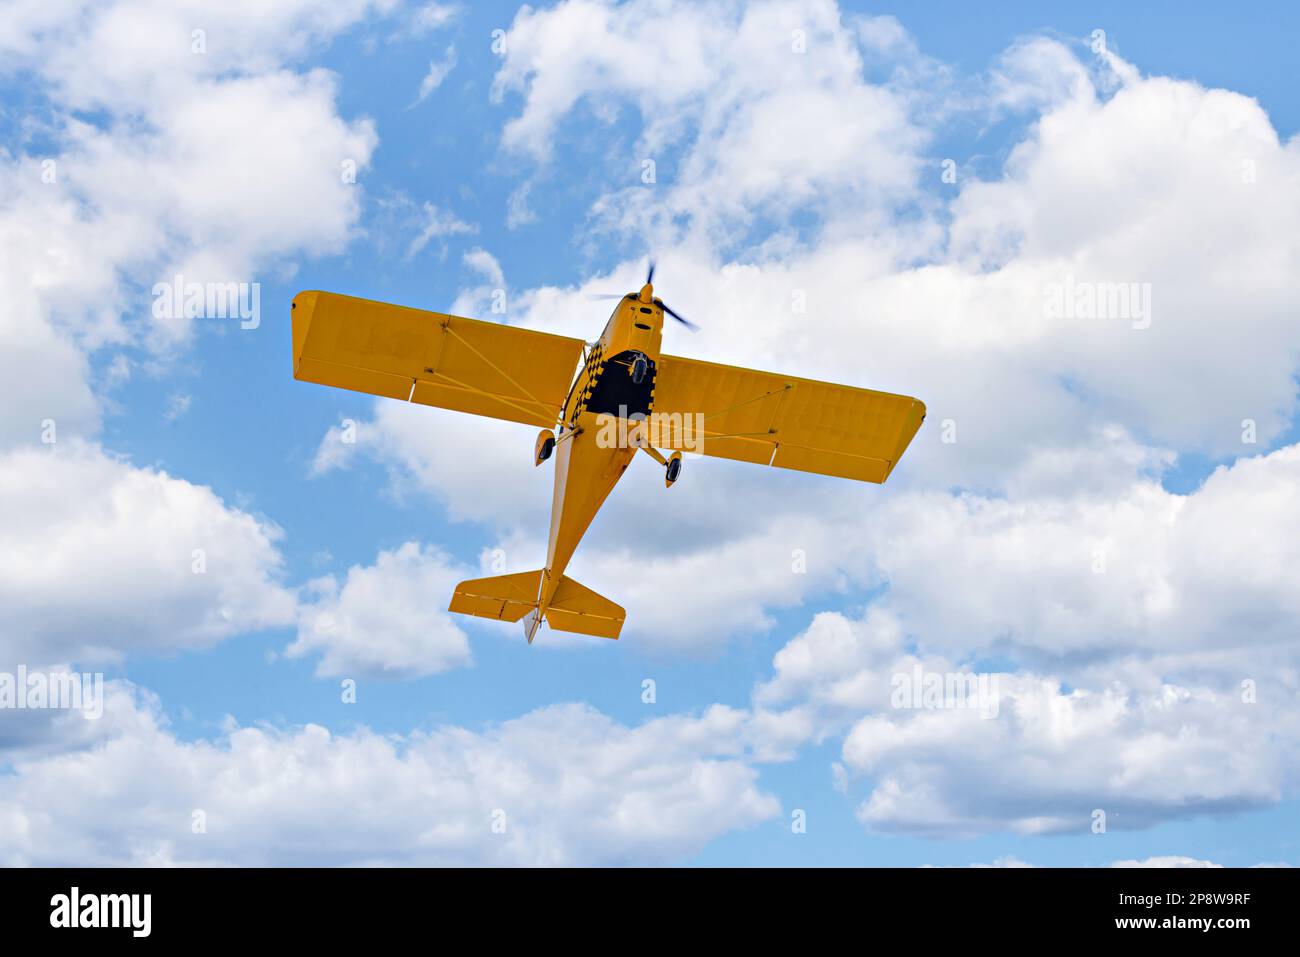 Yellow single-engine ultralight airplane flying in the blue sky with white clouds Stock Photo